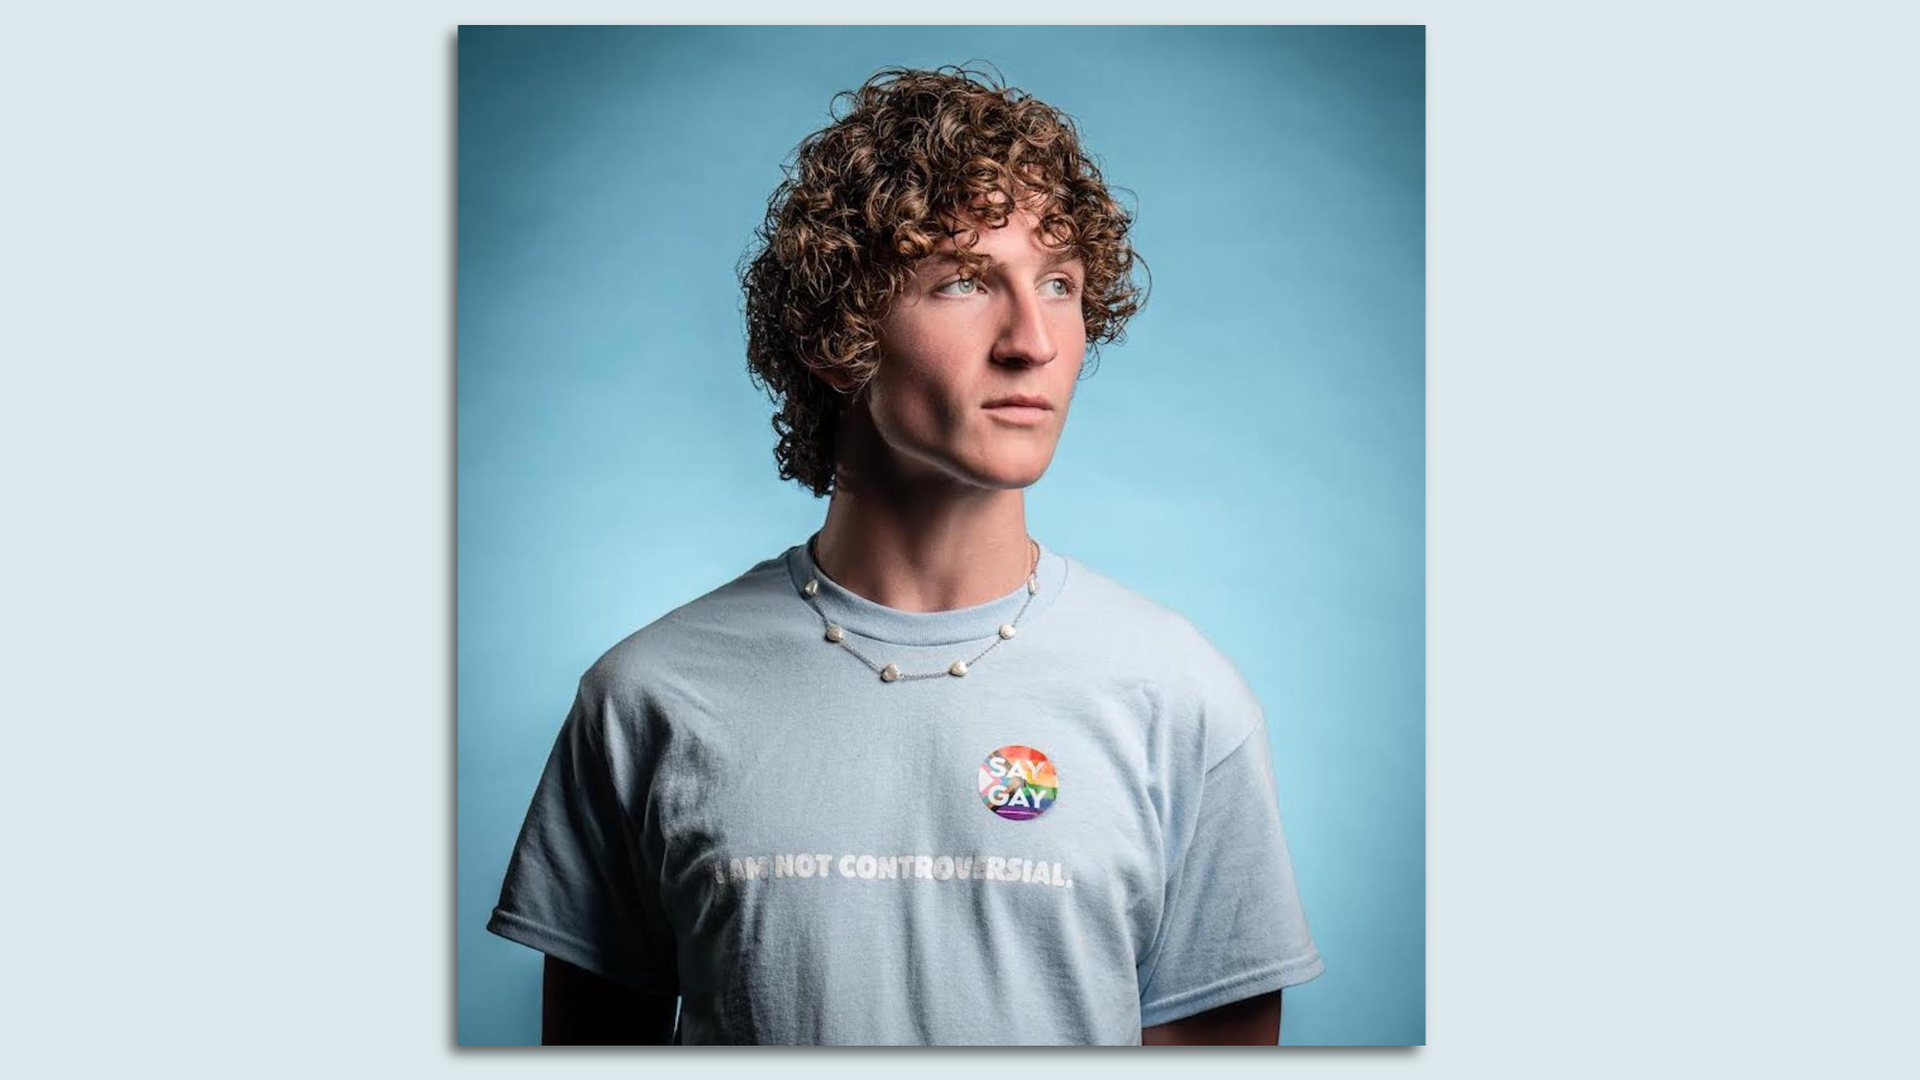 A headshot of Zander Moricz wearing a light blue shirt and a rainbow sticker, staring off into the distance.